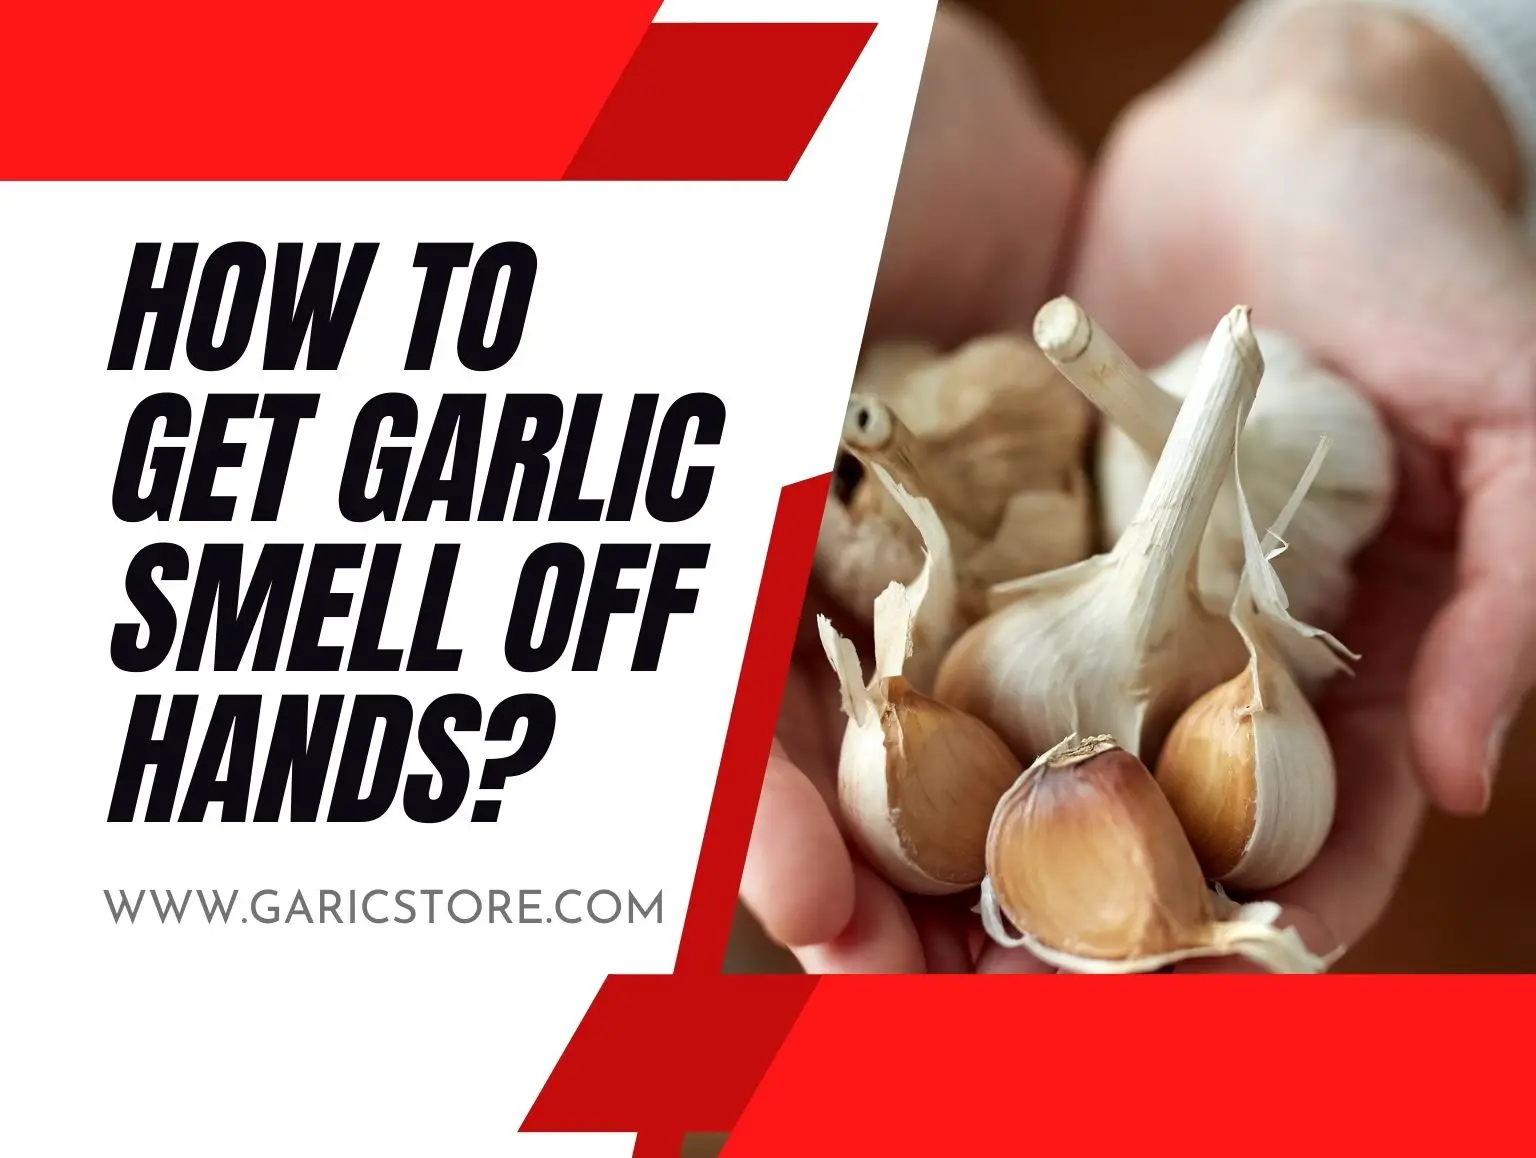 How To Get Garlic Smell off Hands